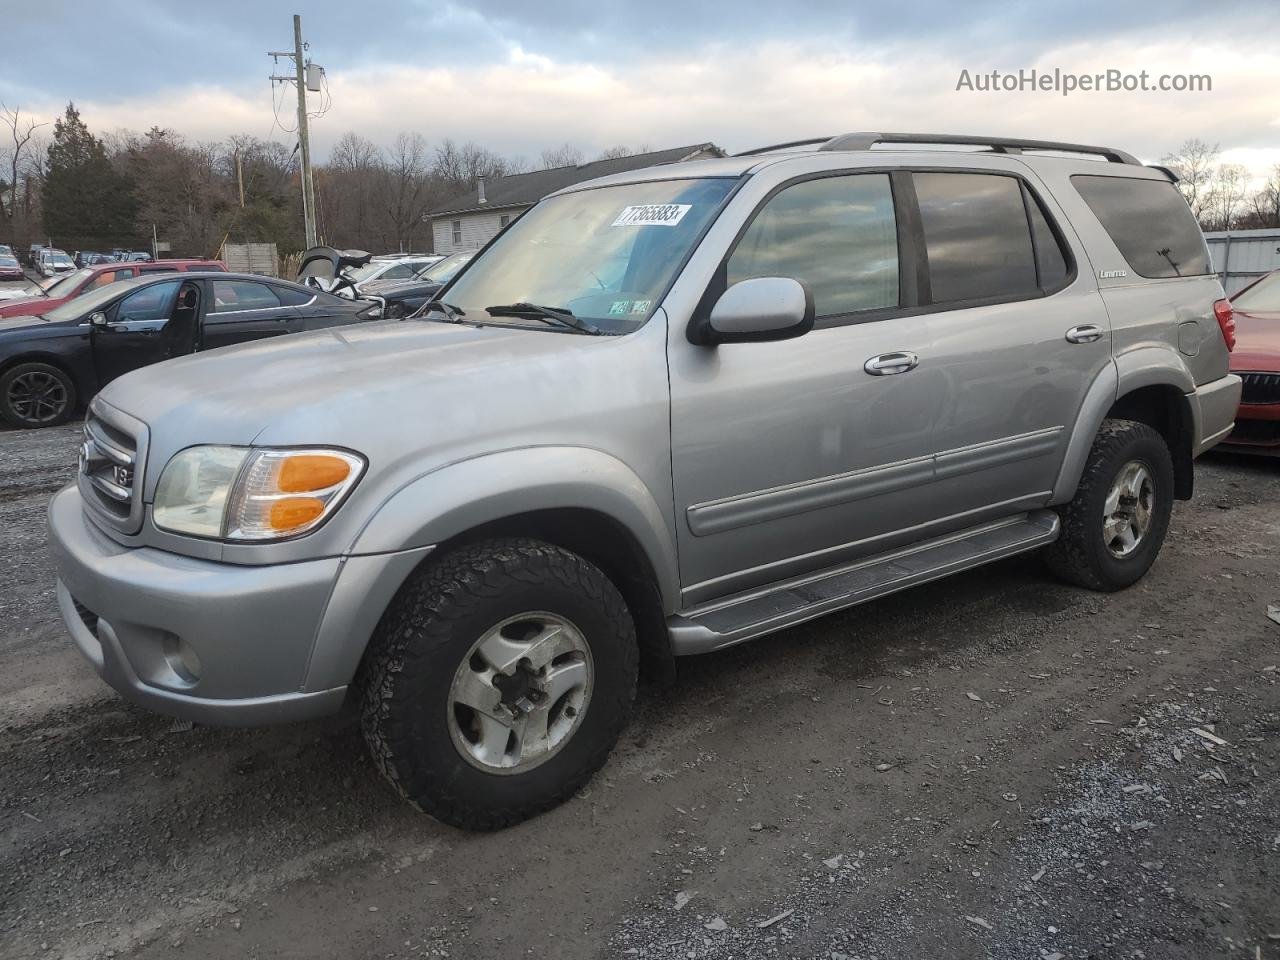 2002 Toyota Sequoia Limited Silver vin: 5TDBT48AX2S110851